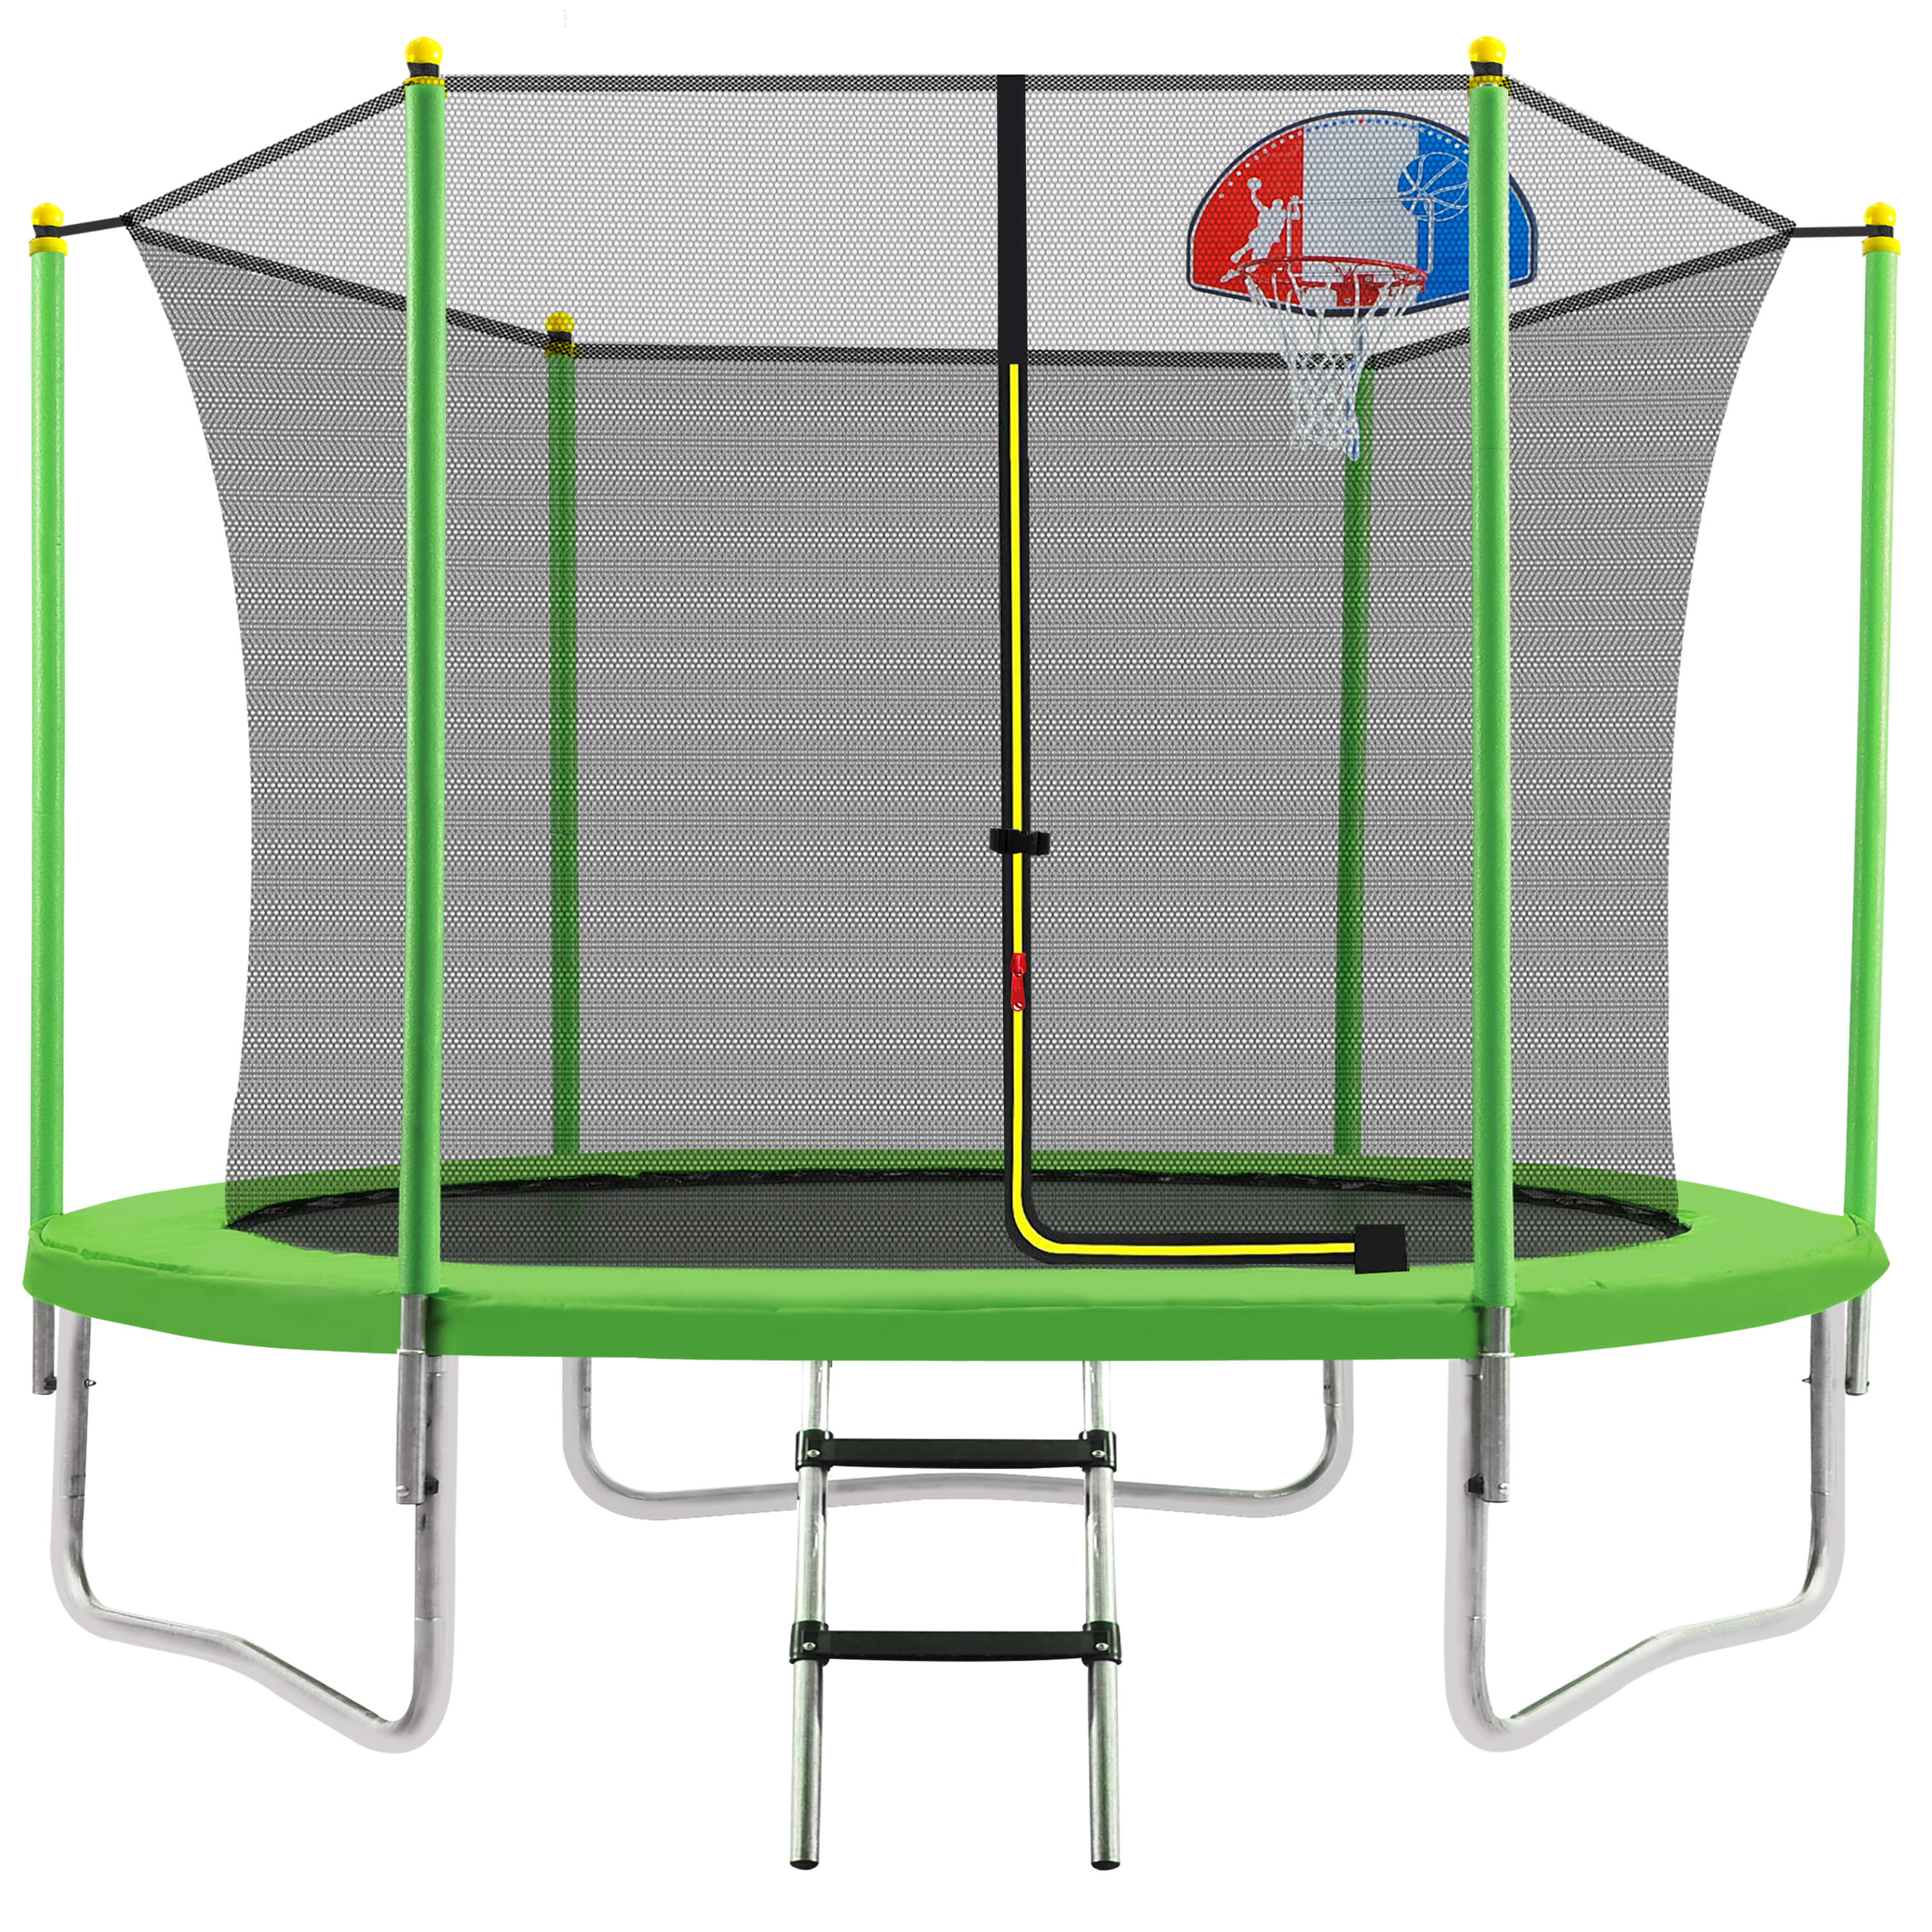 10FT Trampoline for Kids with Safety Enclosure Net, Basketball Hoop and Ladder, Easy Assembly Round Outdoor Recreational Trampoline-CASAINC